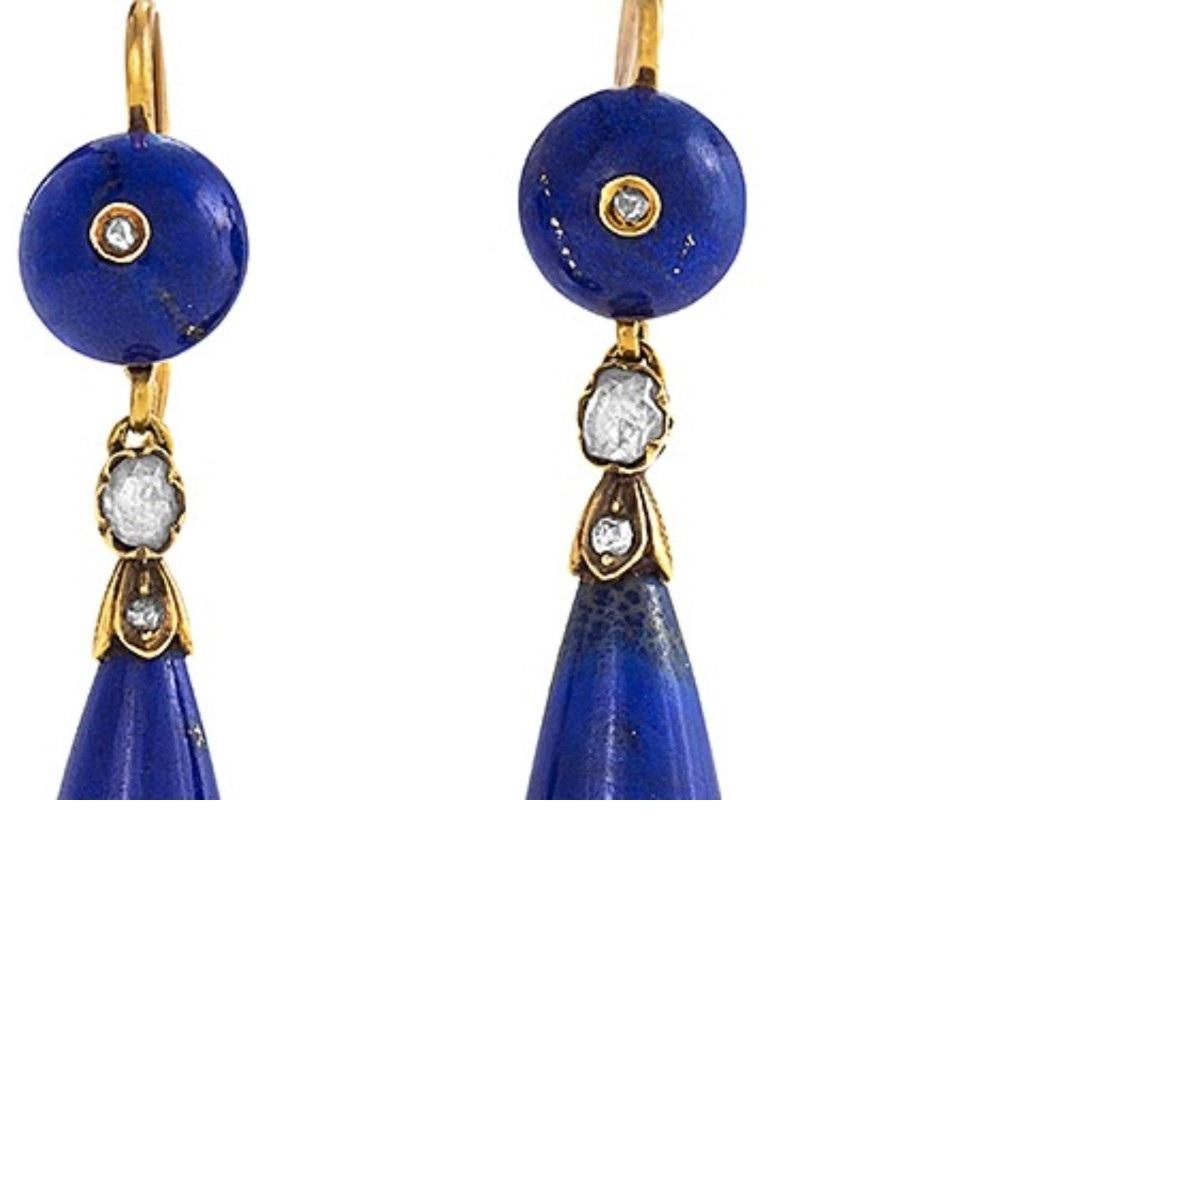 A pair of French Antique 18 karat gold earrings with diamonds and lapis lazuli. The articulated earrings have 6 rose-cut diamonds with an approximate total weight of .24 carat, and round and lozenge shape lapis lazuli stones. French wires later. 